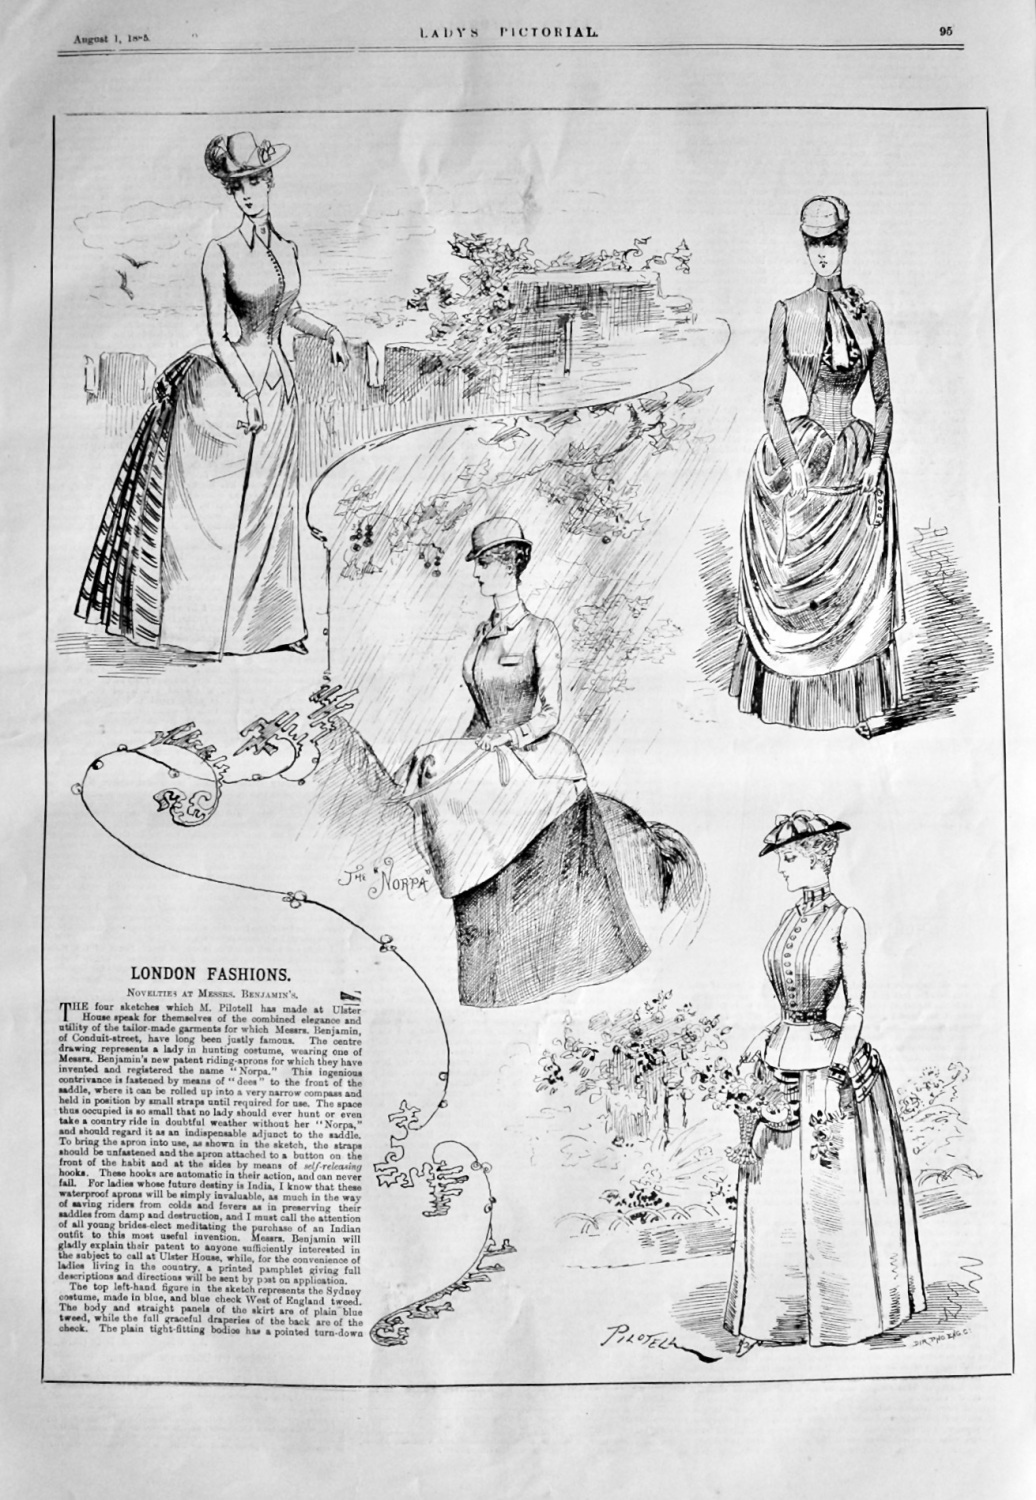 London Fashions. (Drawings by Pilotell). 1885.